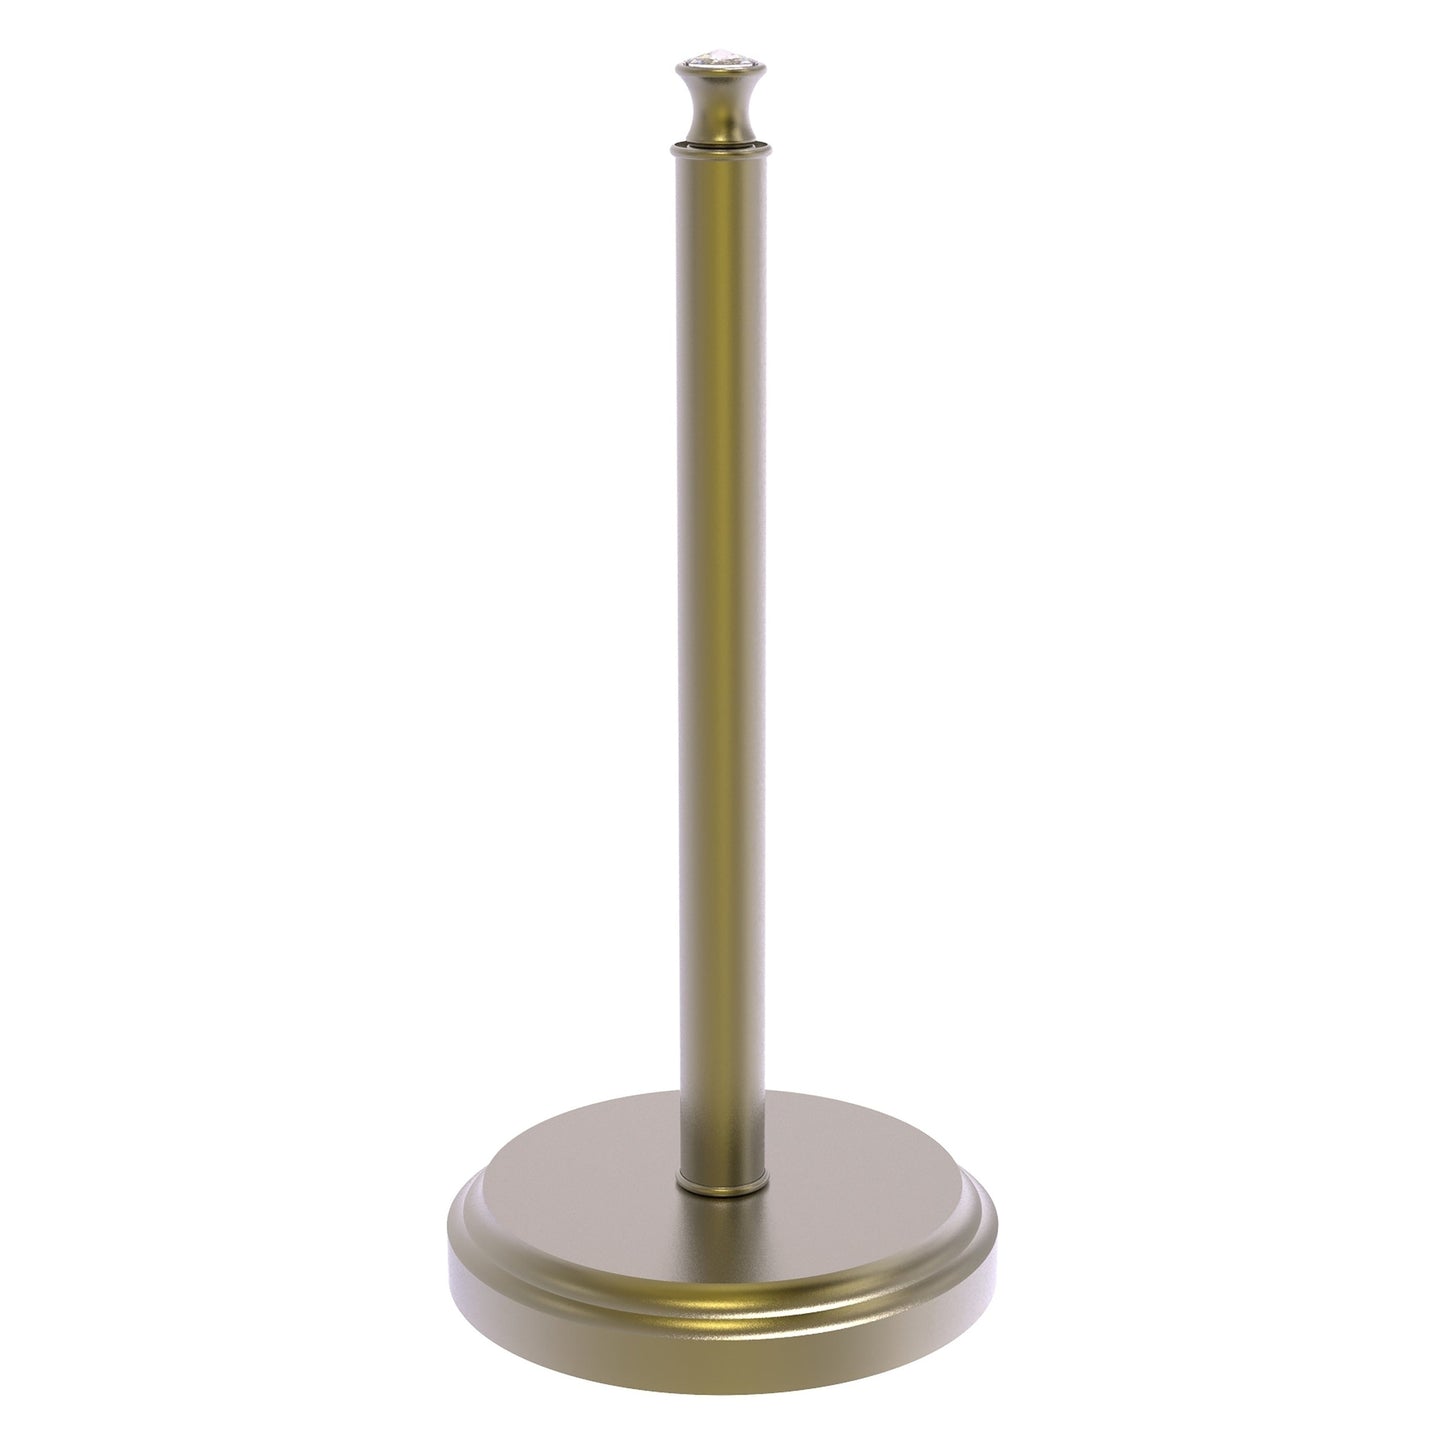 Allied Brass Carolina Crystal 6.5" x 6.5" Antique Brass Solid Brass Countertop Paper Towel Stand